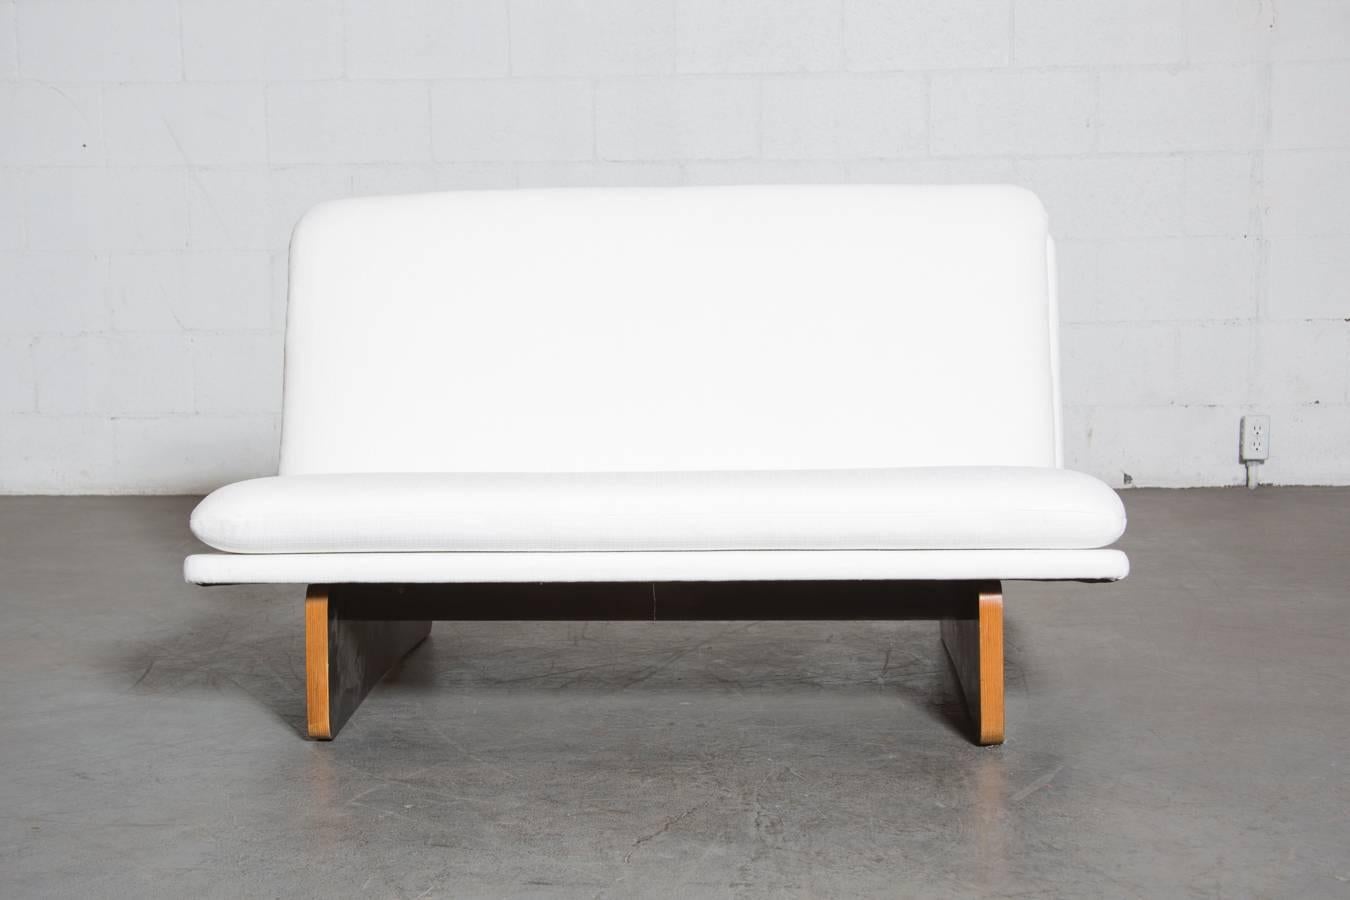 Newly Re-upholstered Little Bright White Kho Liang Le Loveseat with Rare Black Laminated Plywood Base. Base is Original and shows light scratching to Black Laminate and Wood Consistent with Age and Use.